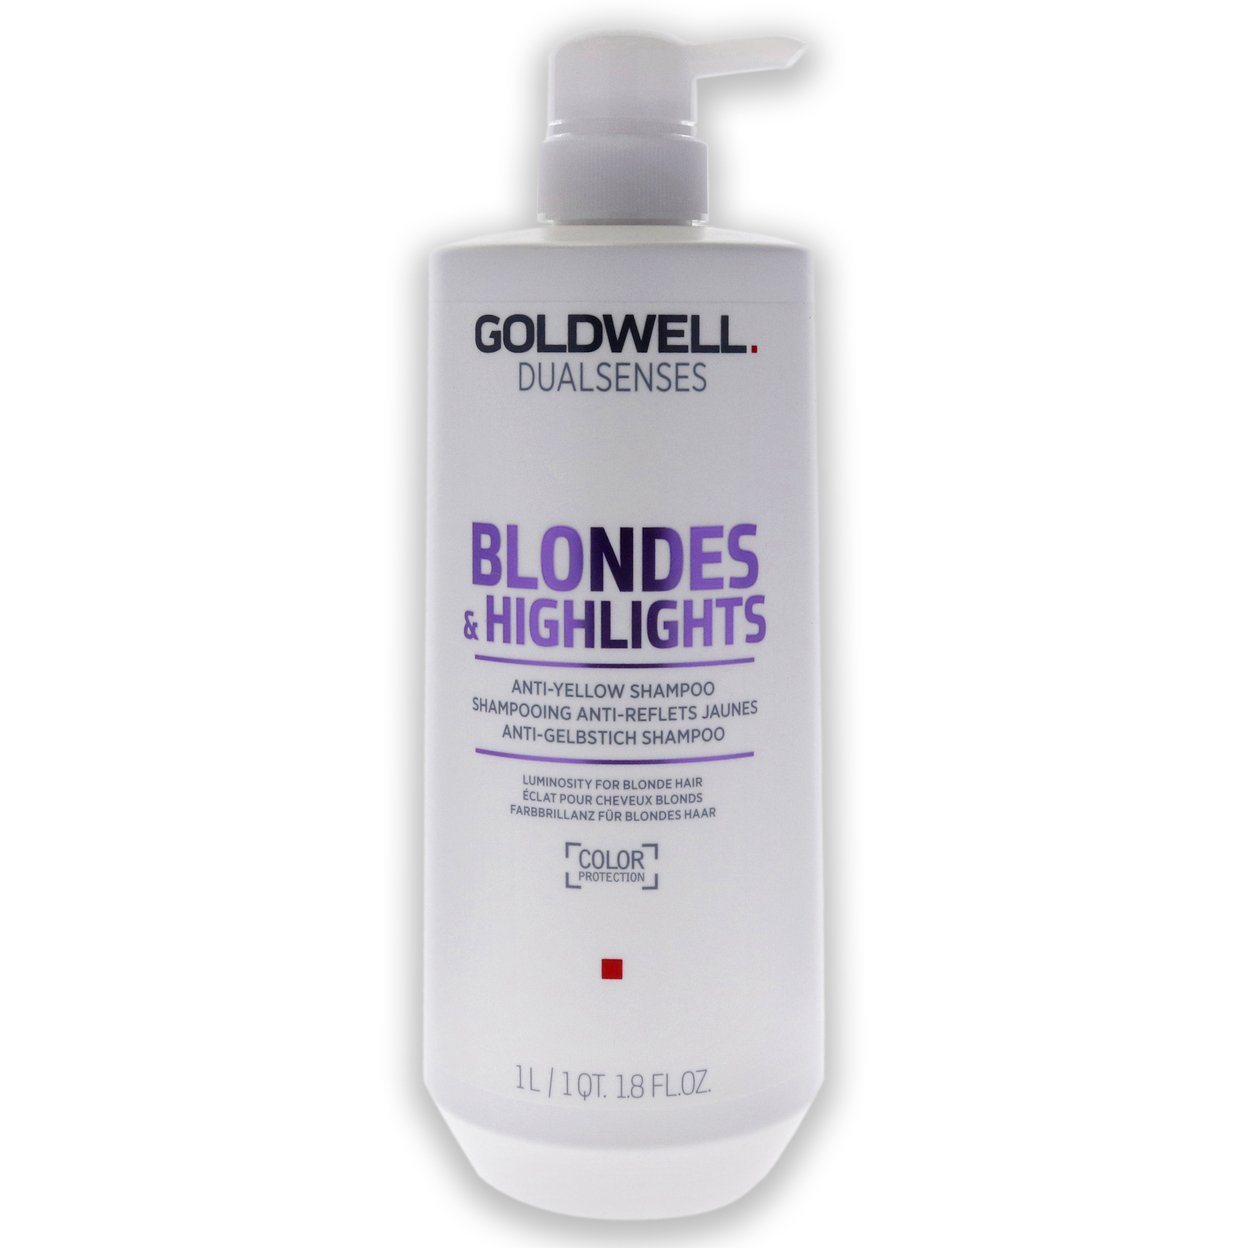 Goldwell Dualsenses Blondes And Highlights Shampoo 34 Oz